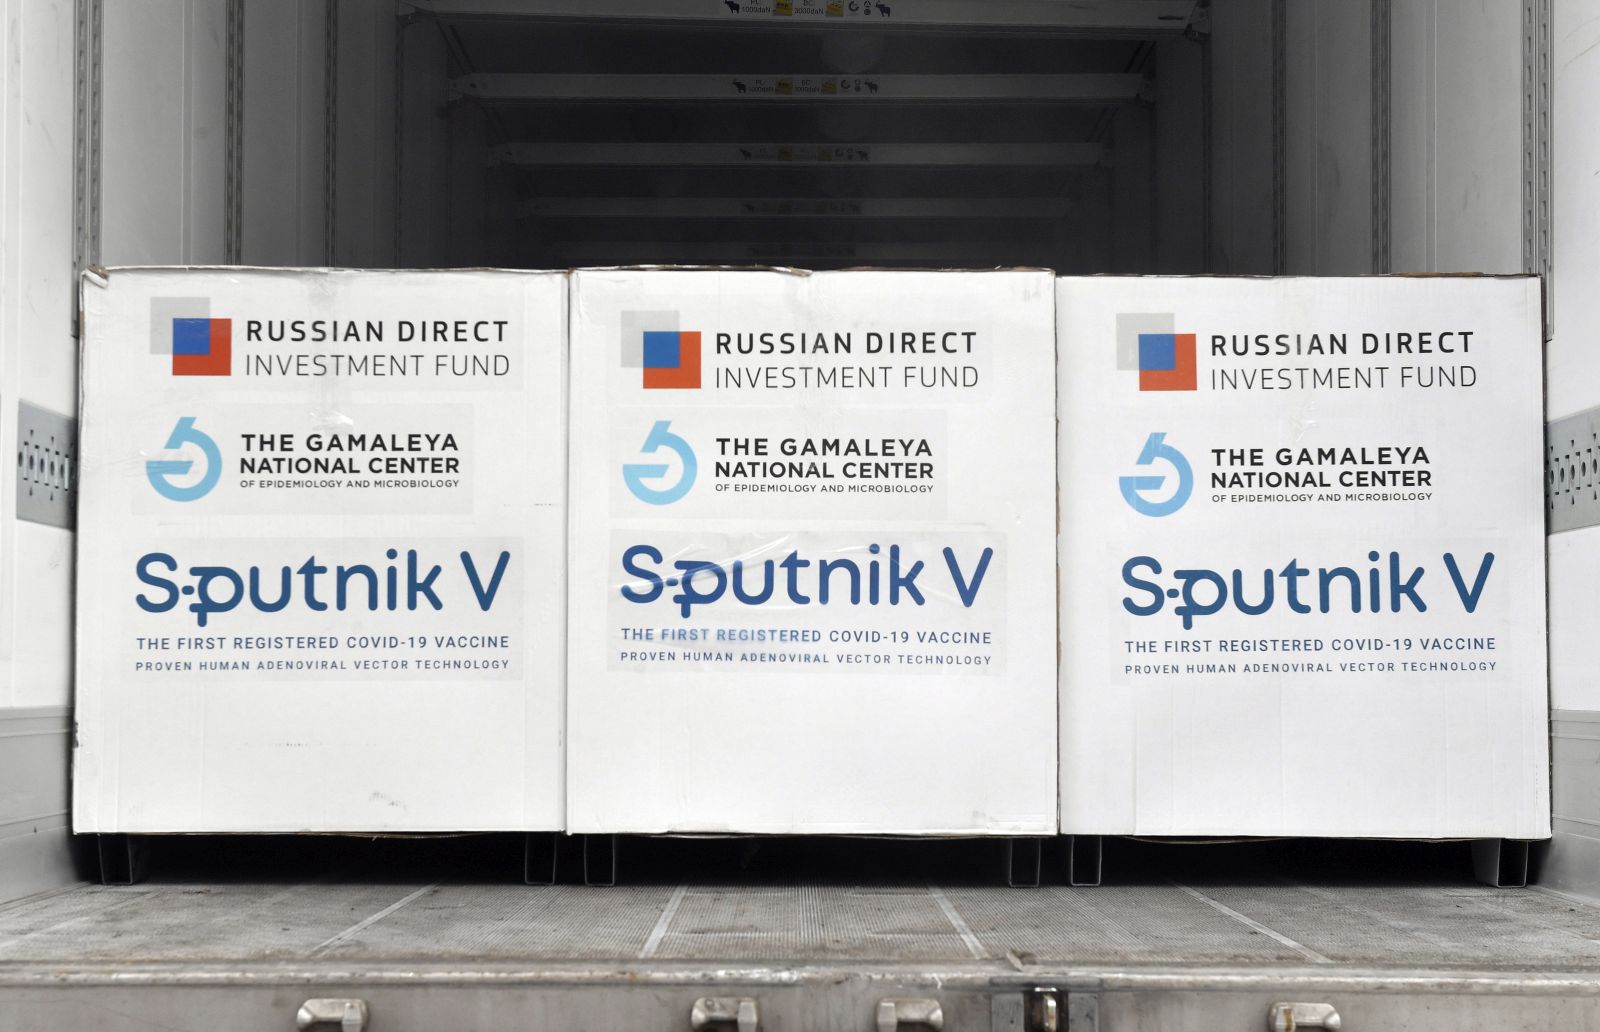 epa09051577 Boxes of Sputnik V vaccines are ready to be unloaded unloaded from a truck at a warehouse of Hungaropharma, a Hungarian pharmaceutical wholesale company, in Budapest, Hungary, after a shipment of 280 thousand doses of the Russian vaccine Sputnik V (Russian name: Gam-KOVID-Vak) arrived in Hungary 04 March 2021.  EPA/Zoltan Mathe HUNGARY OUT